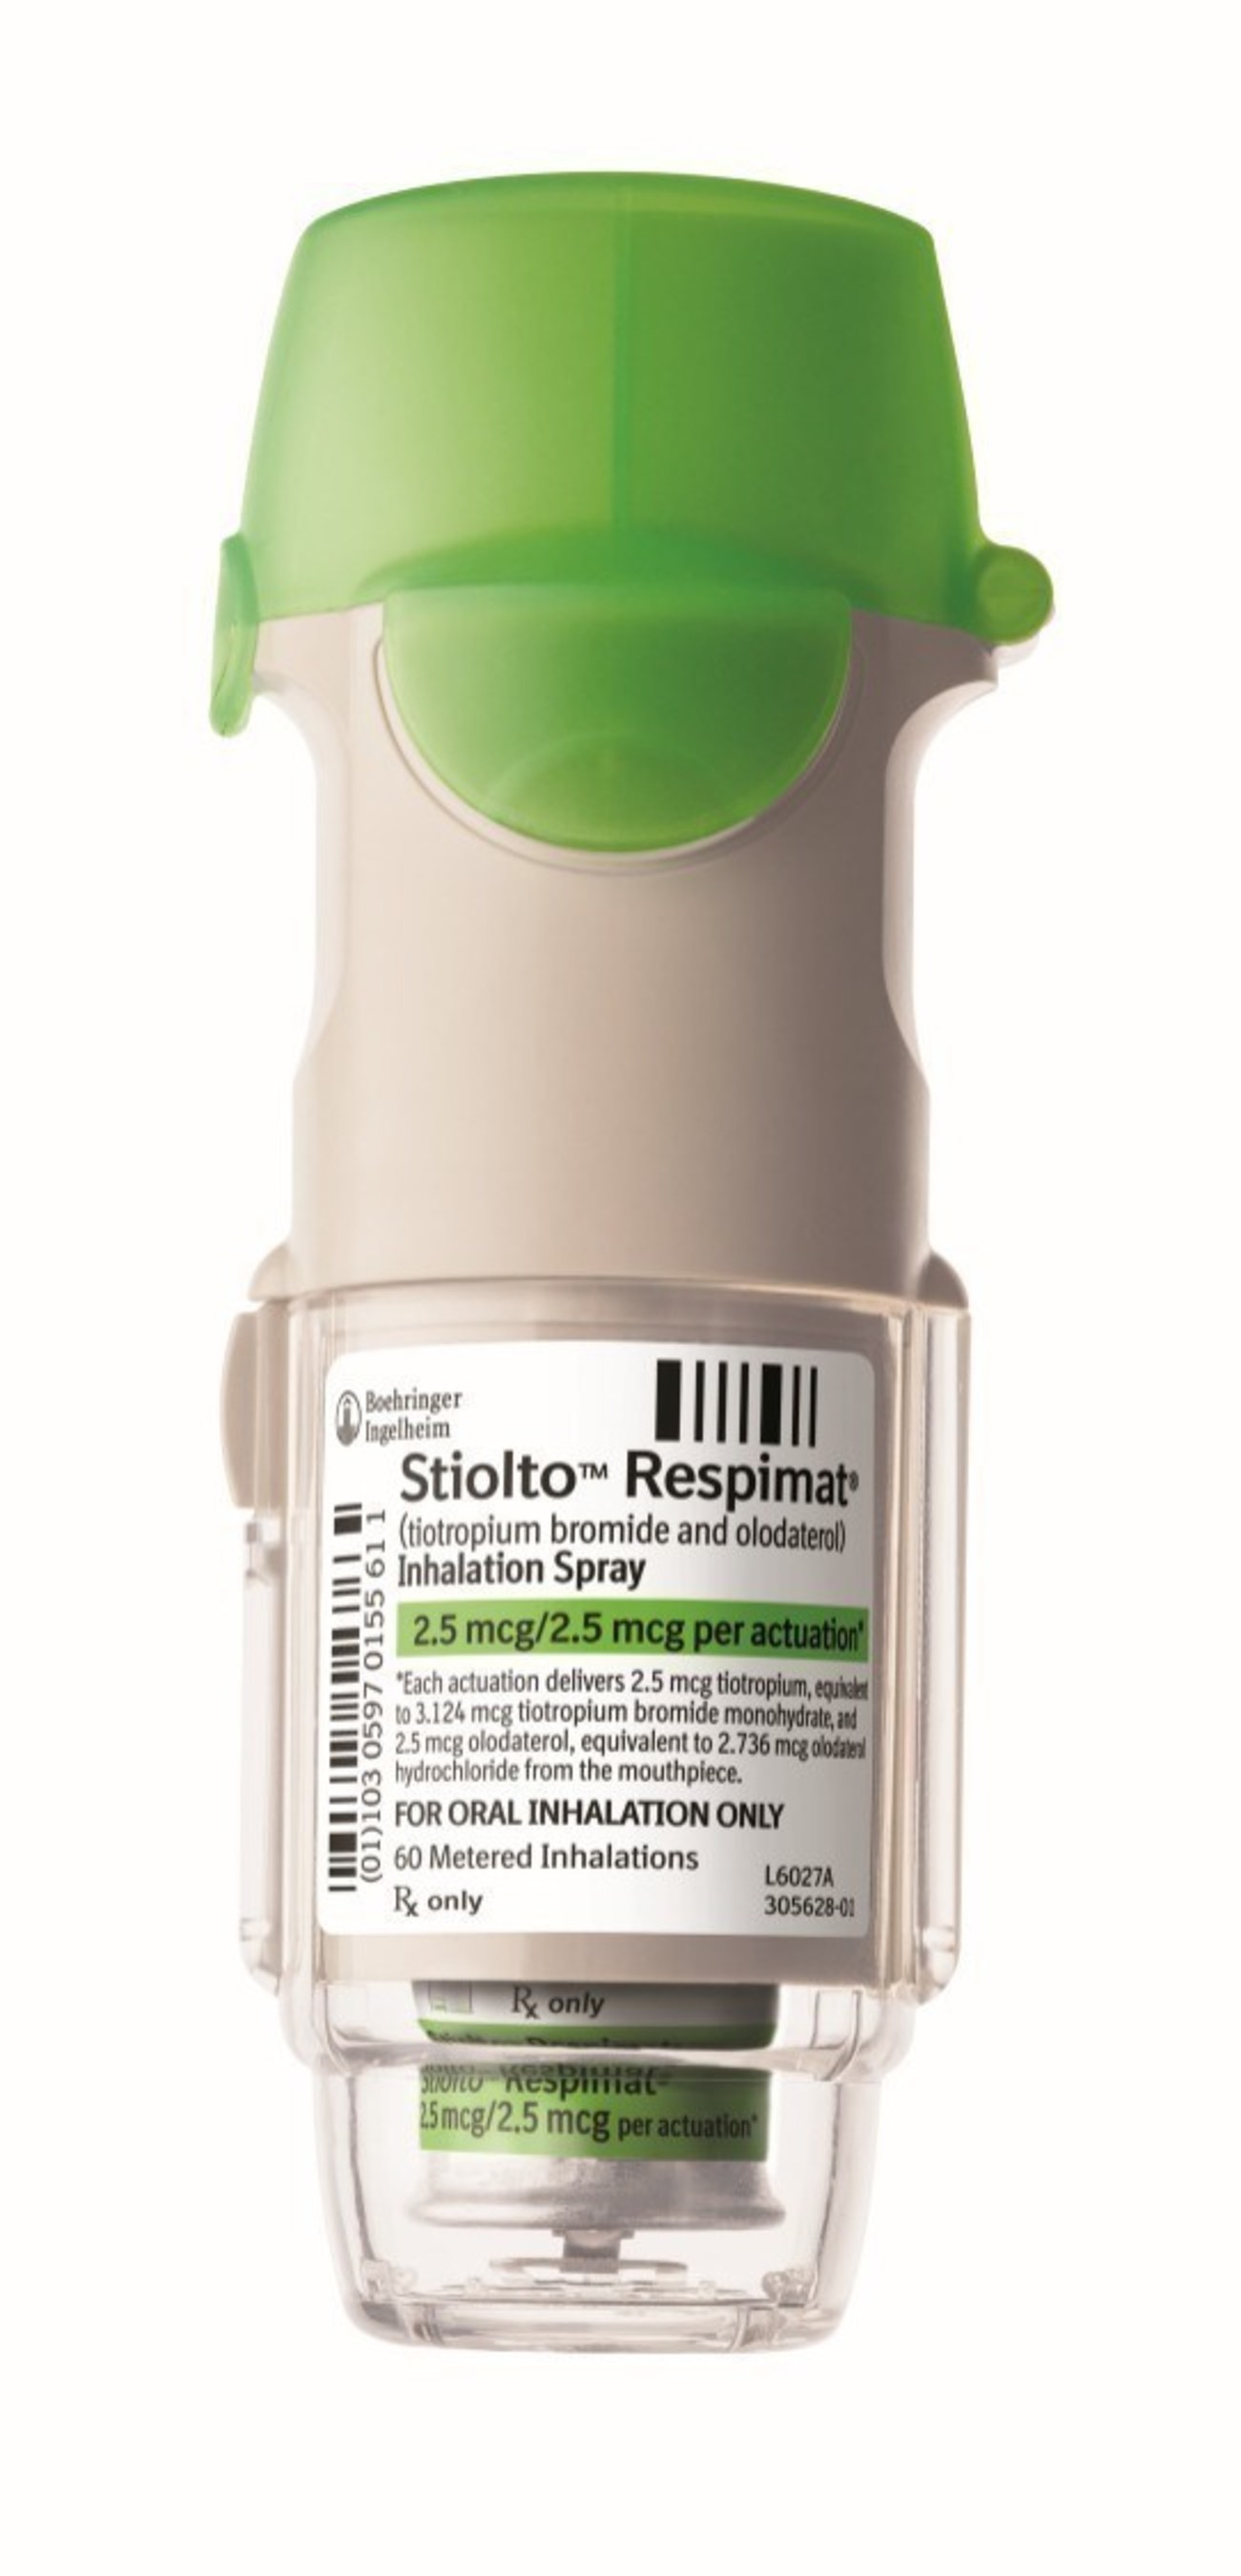 STIOLTO™ RESPIMAT® Now Available in the United States for the Treatment